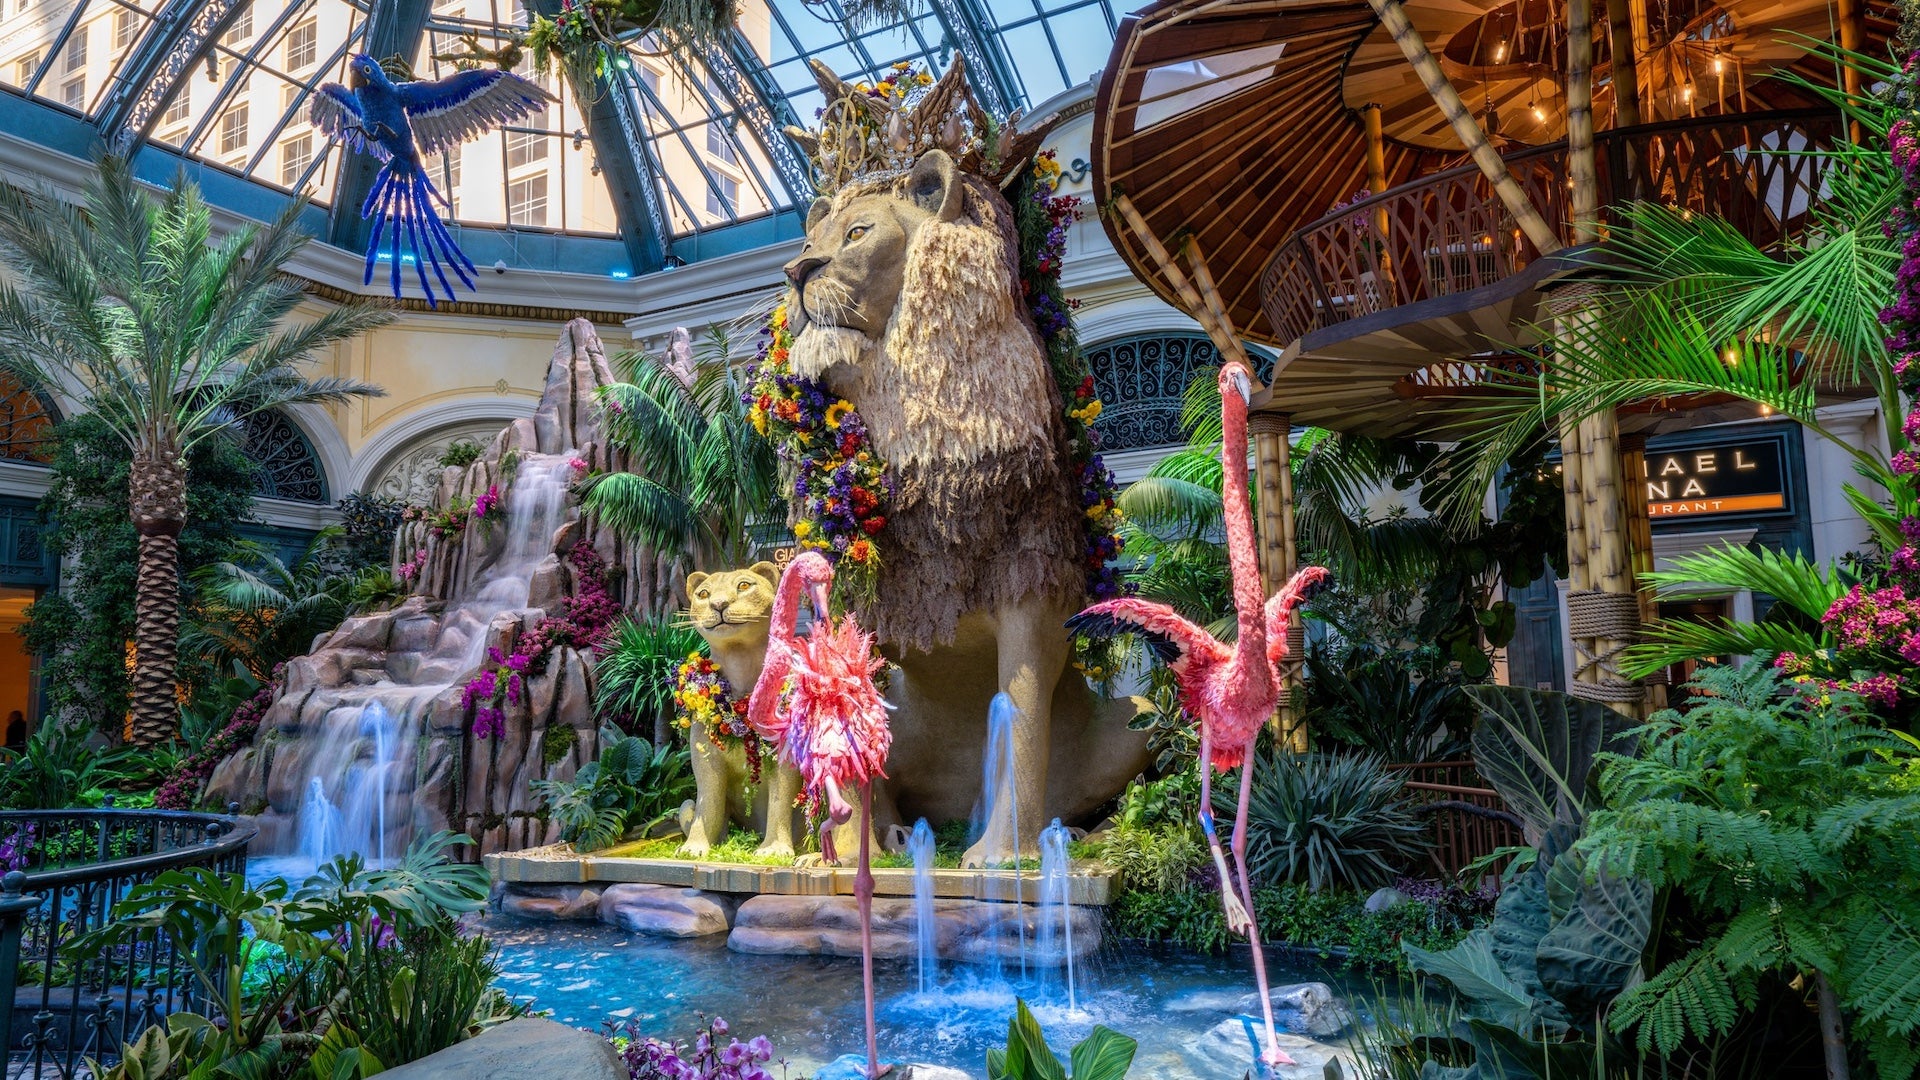 Jungle themed garden with a lion, flamingos, and water feature